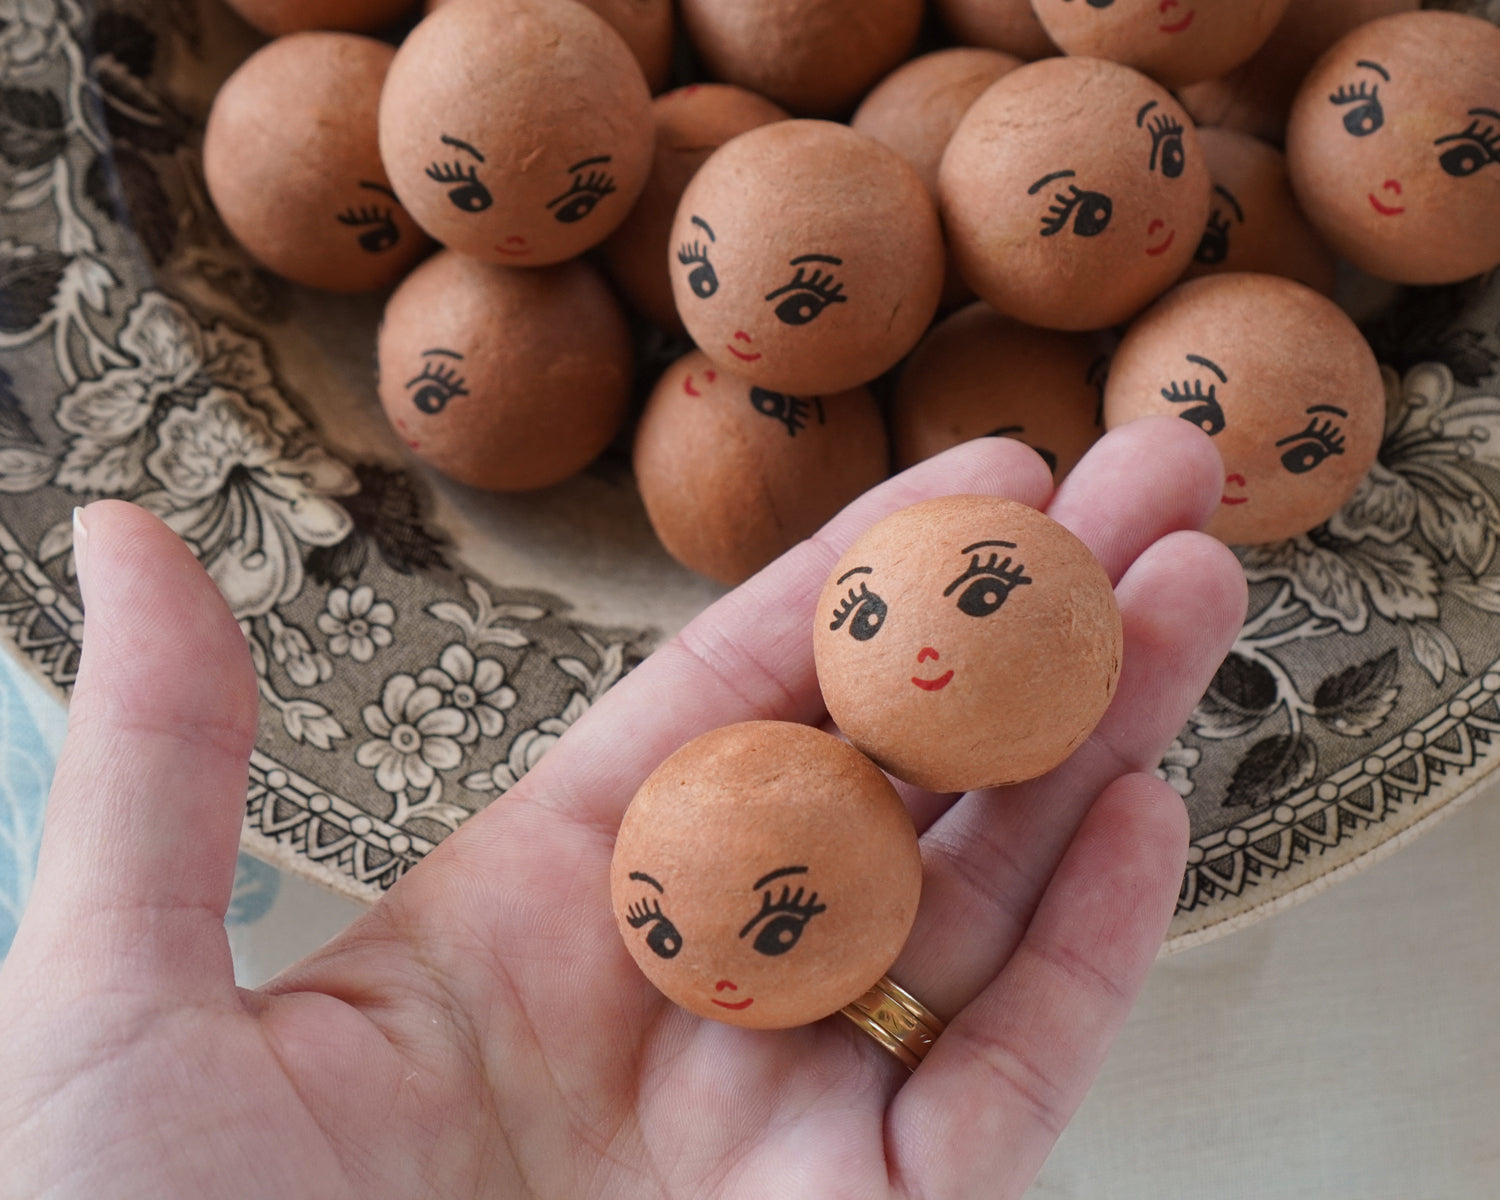 Brown Spun Cotton Heads: CHARM - 30mm Vintage-Style Cotton Doll Heads with Faces, 12 Pcs.